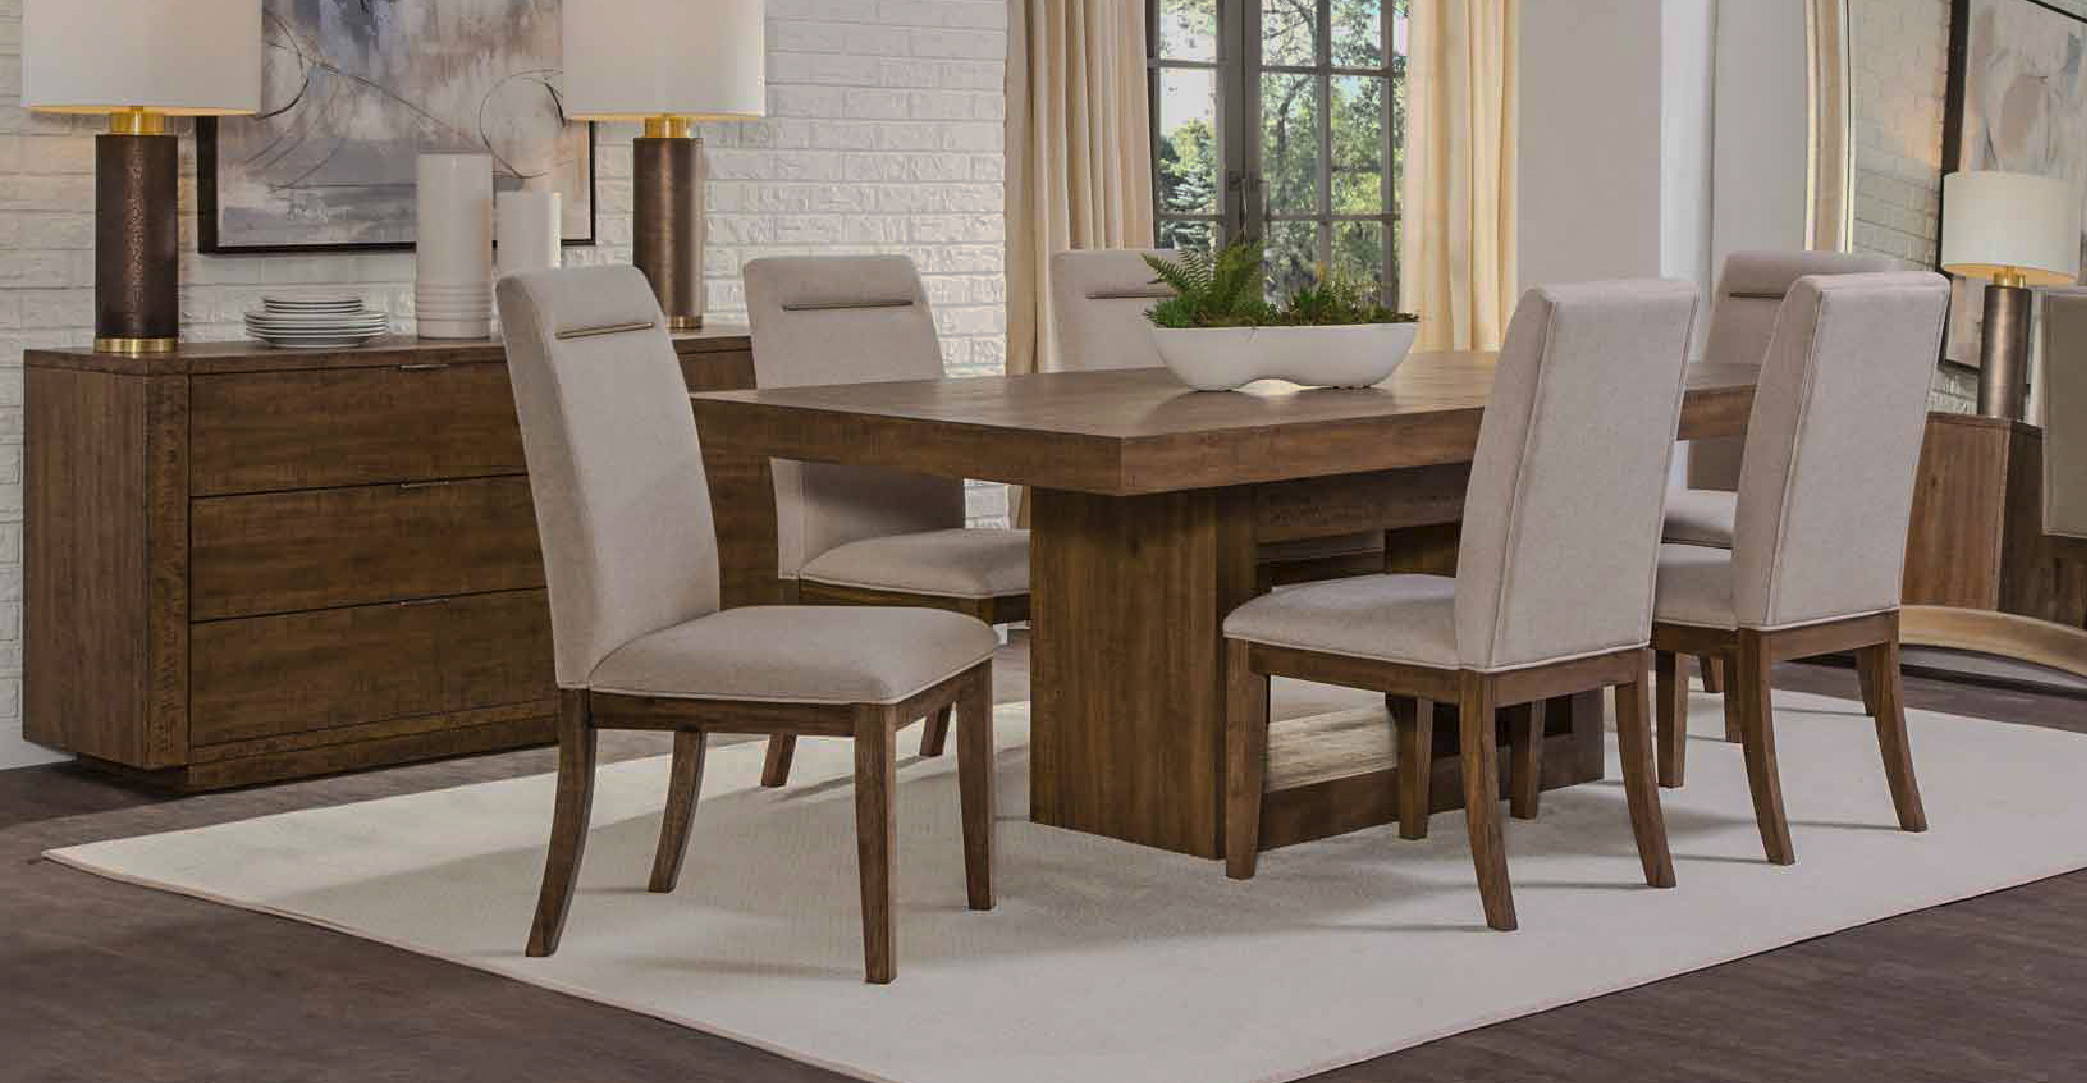 Modern classic round dining room set with 4 chairs. Click to Shop more dining room options. 